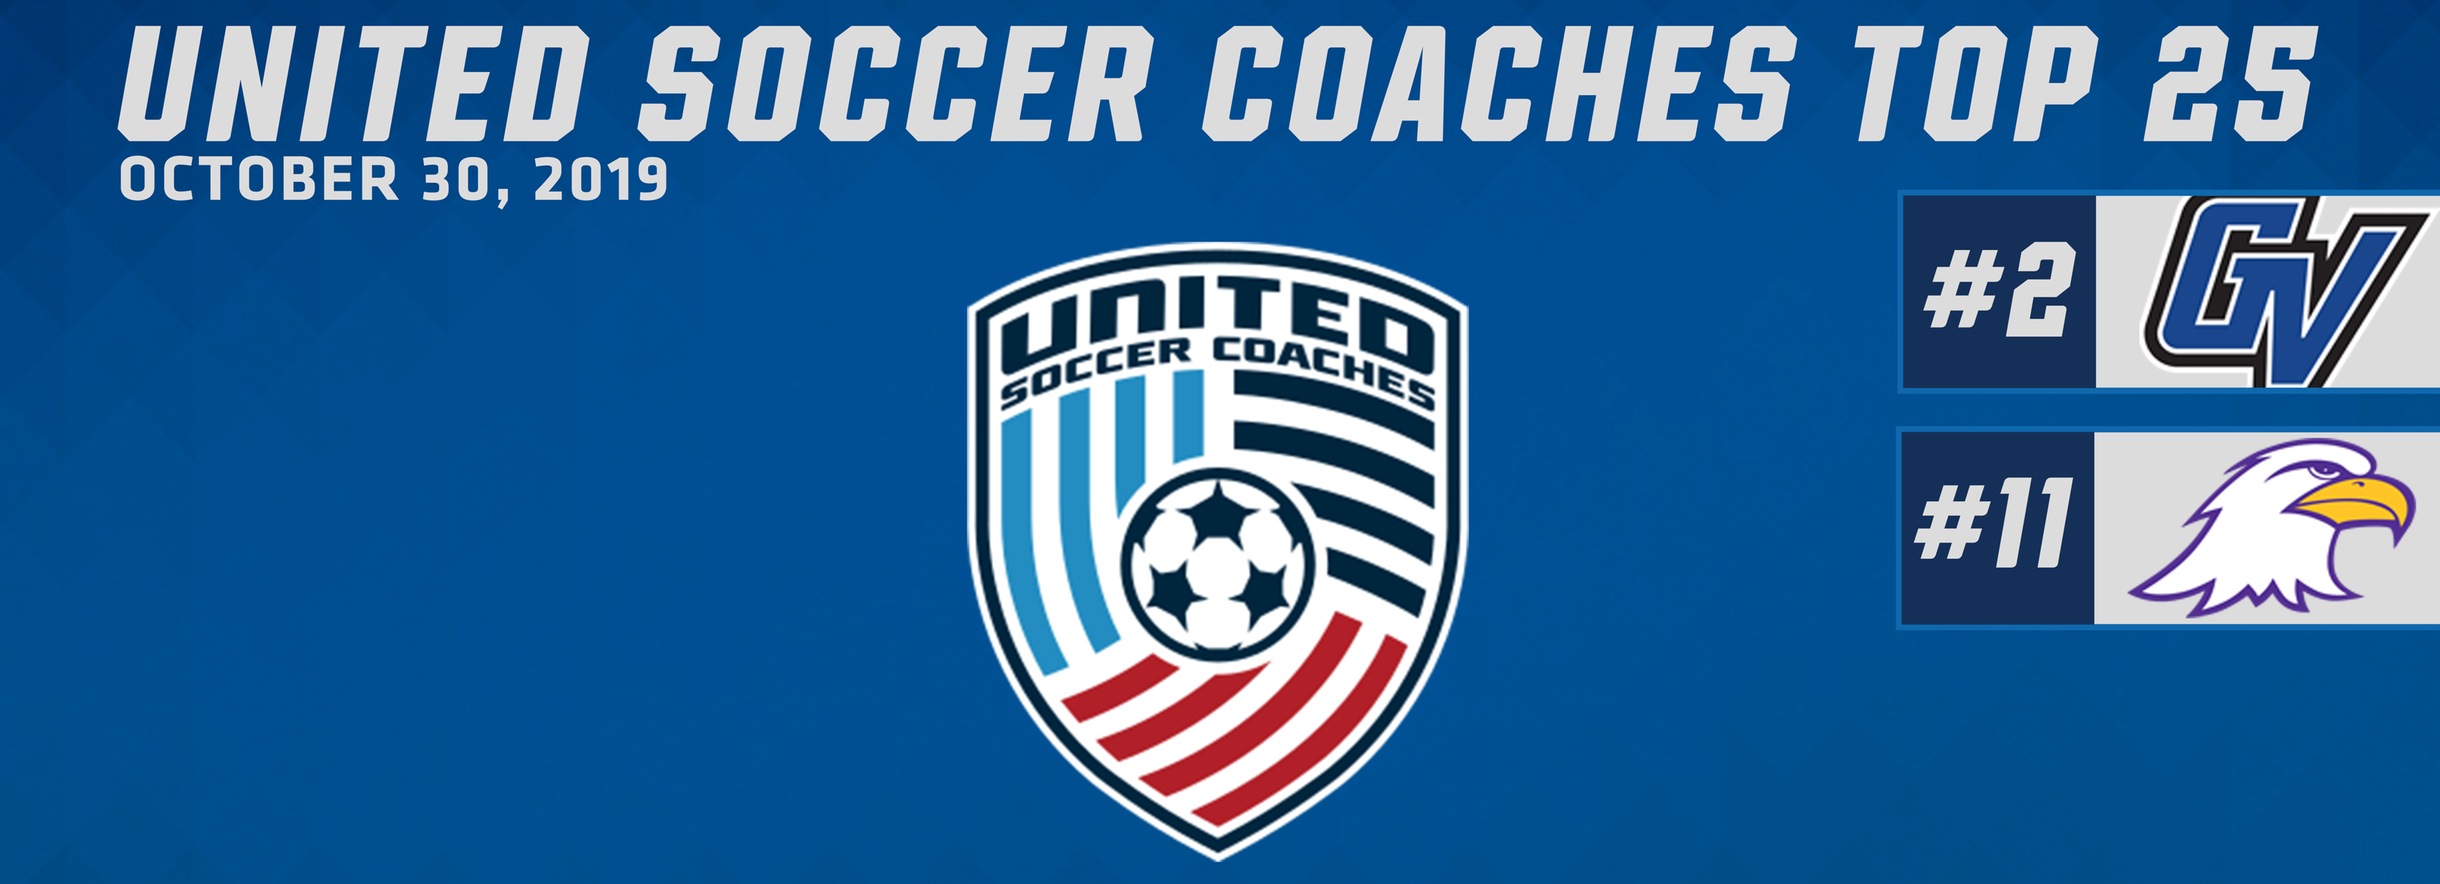 Grand Valley St. 2nd, Ashland 11th In United Soccer Coaches Poll